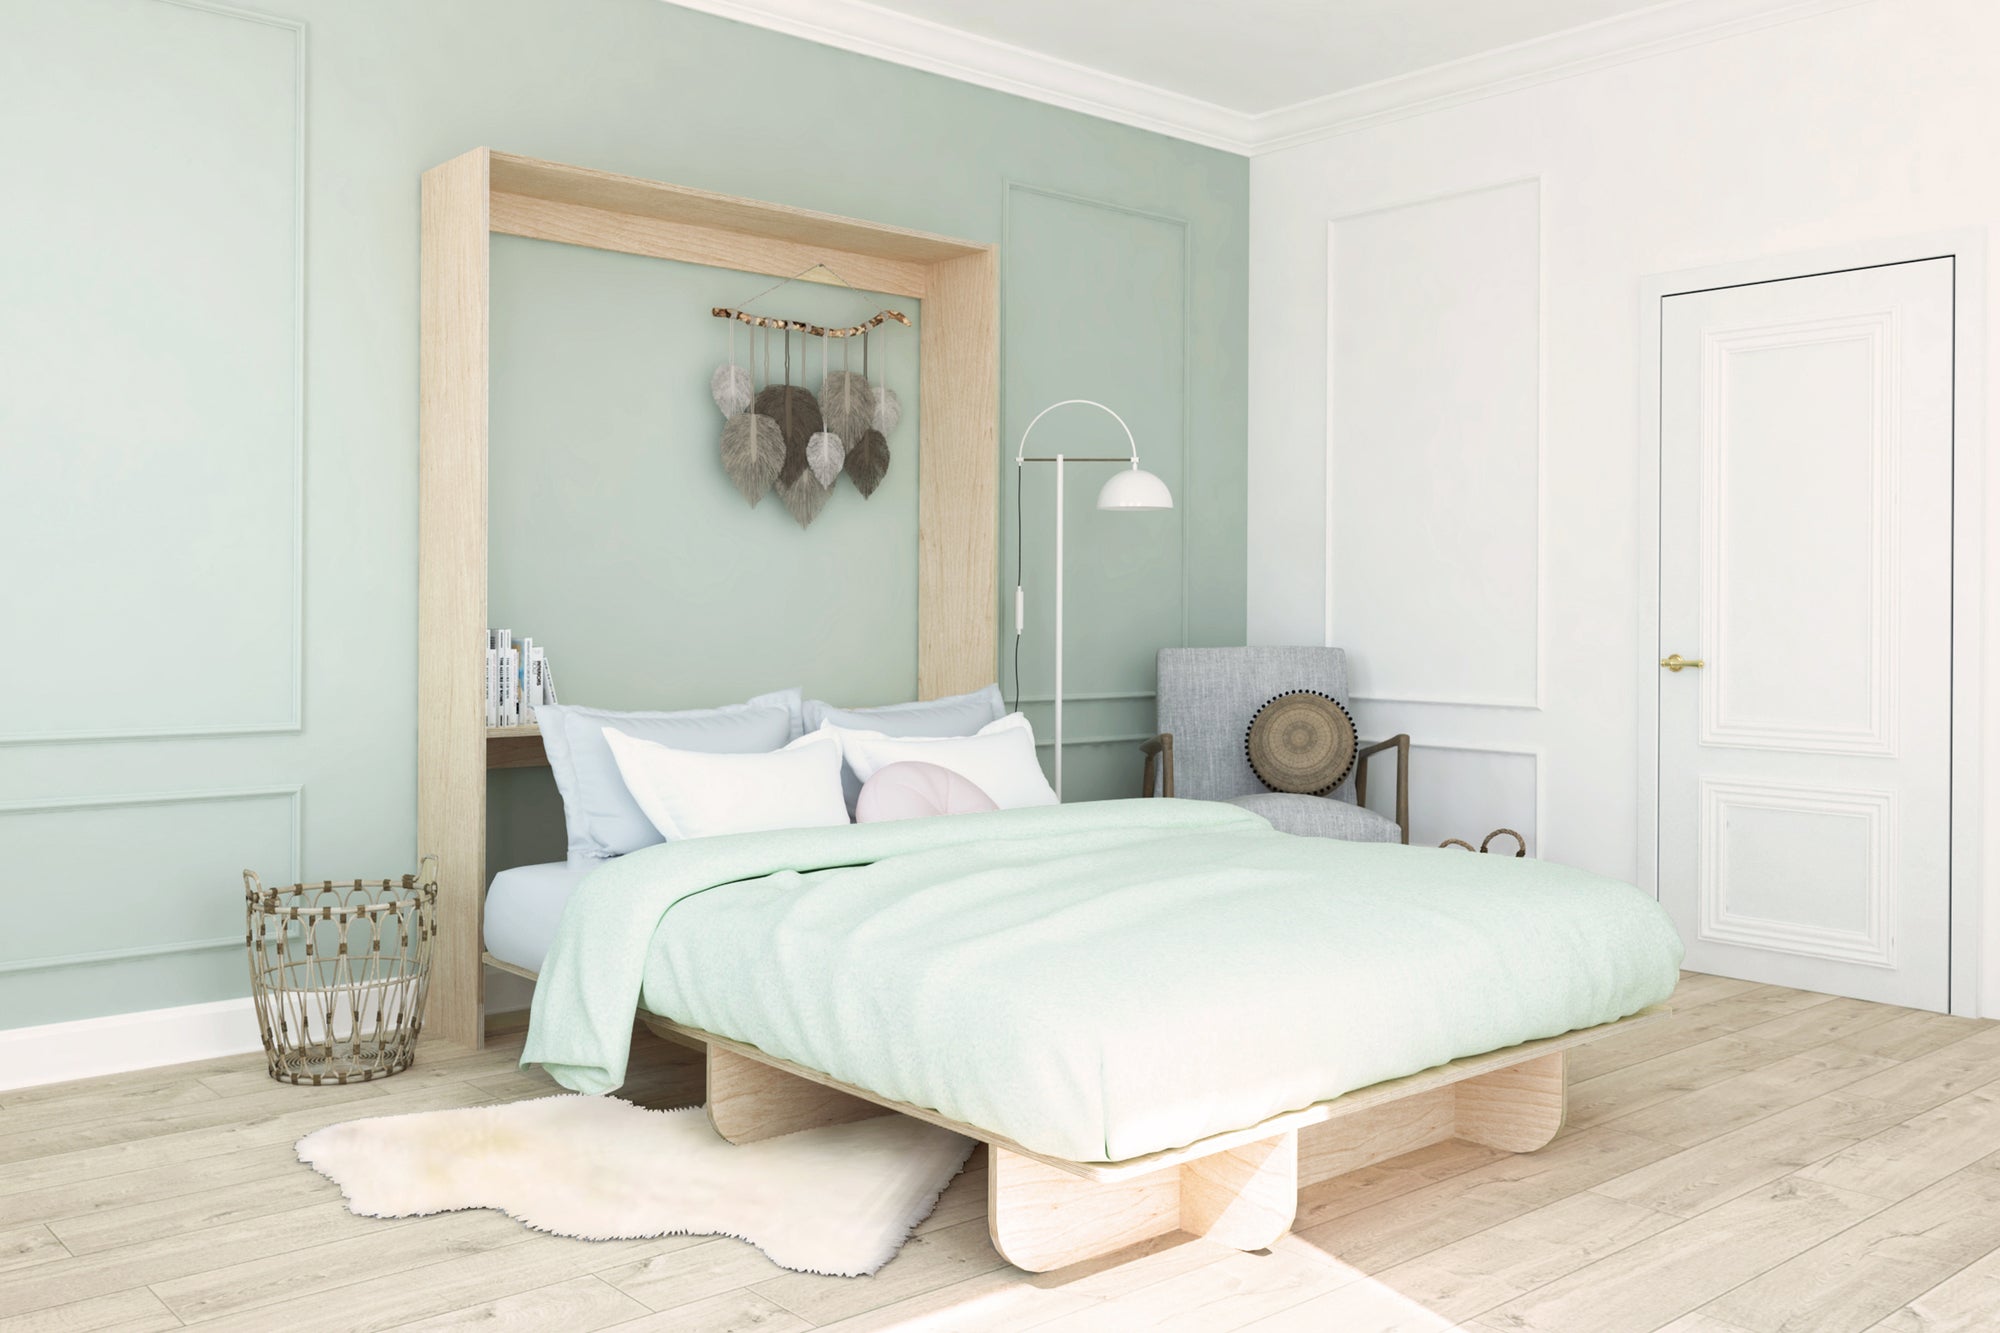 Queen murphy bed in a boho bedroom with mint bedsheets and walls